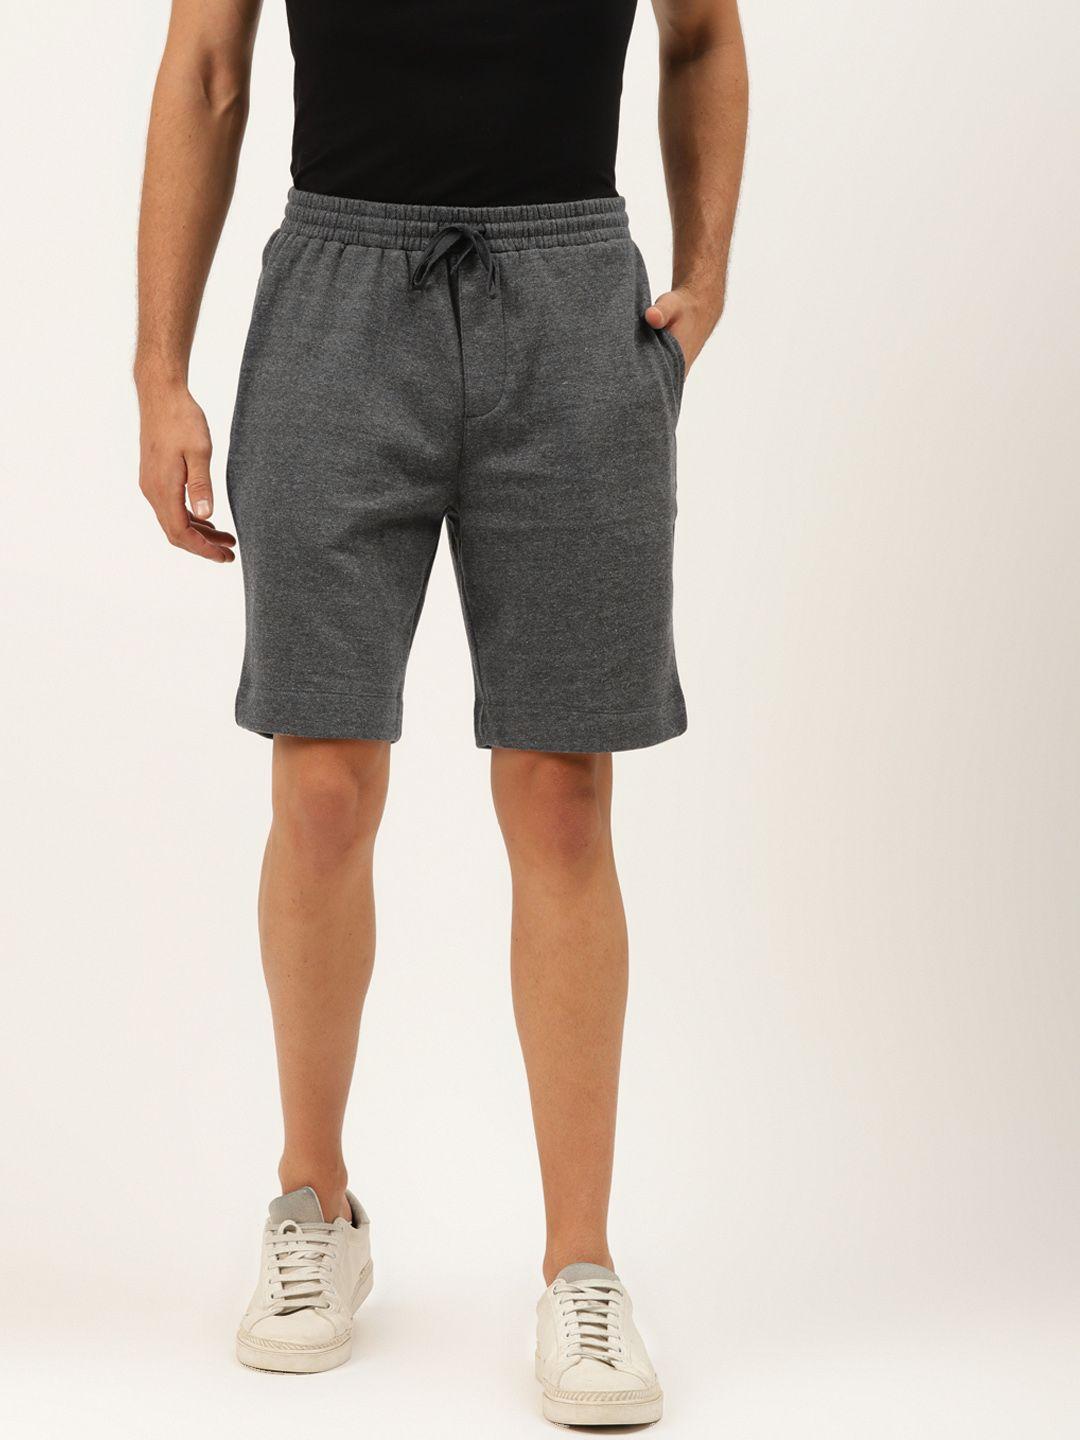 ether men charcoal grey solid mid-rise regular shorts